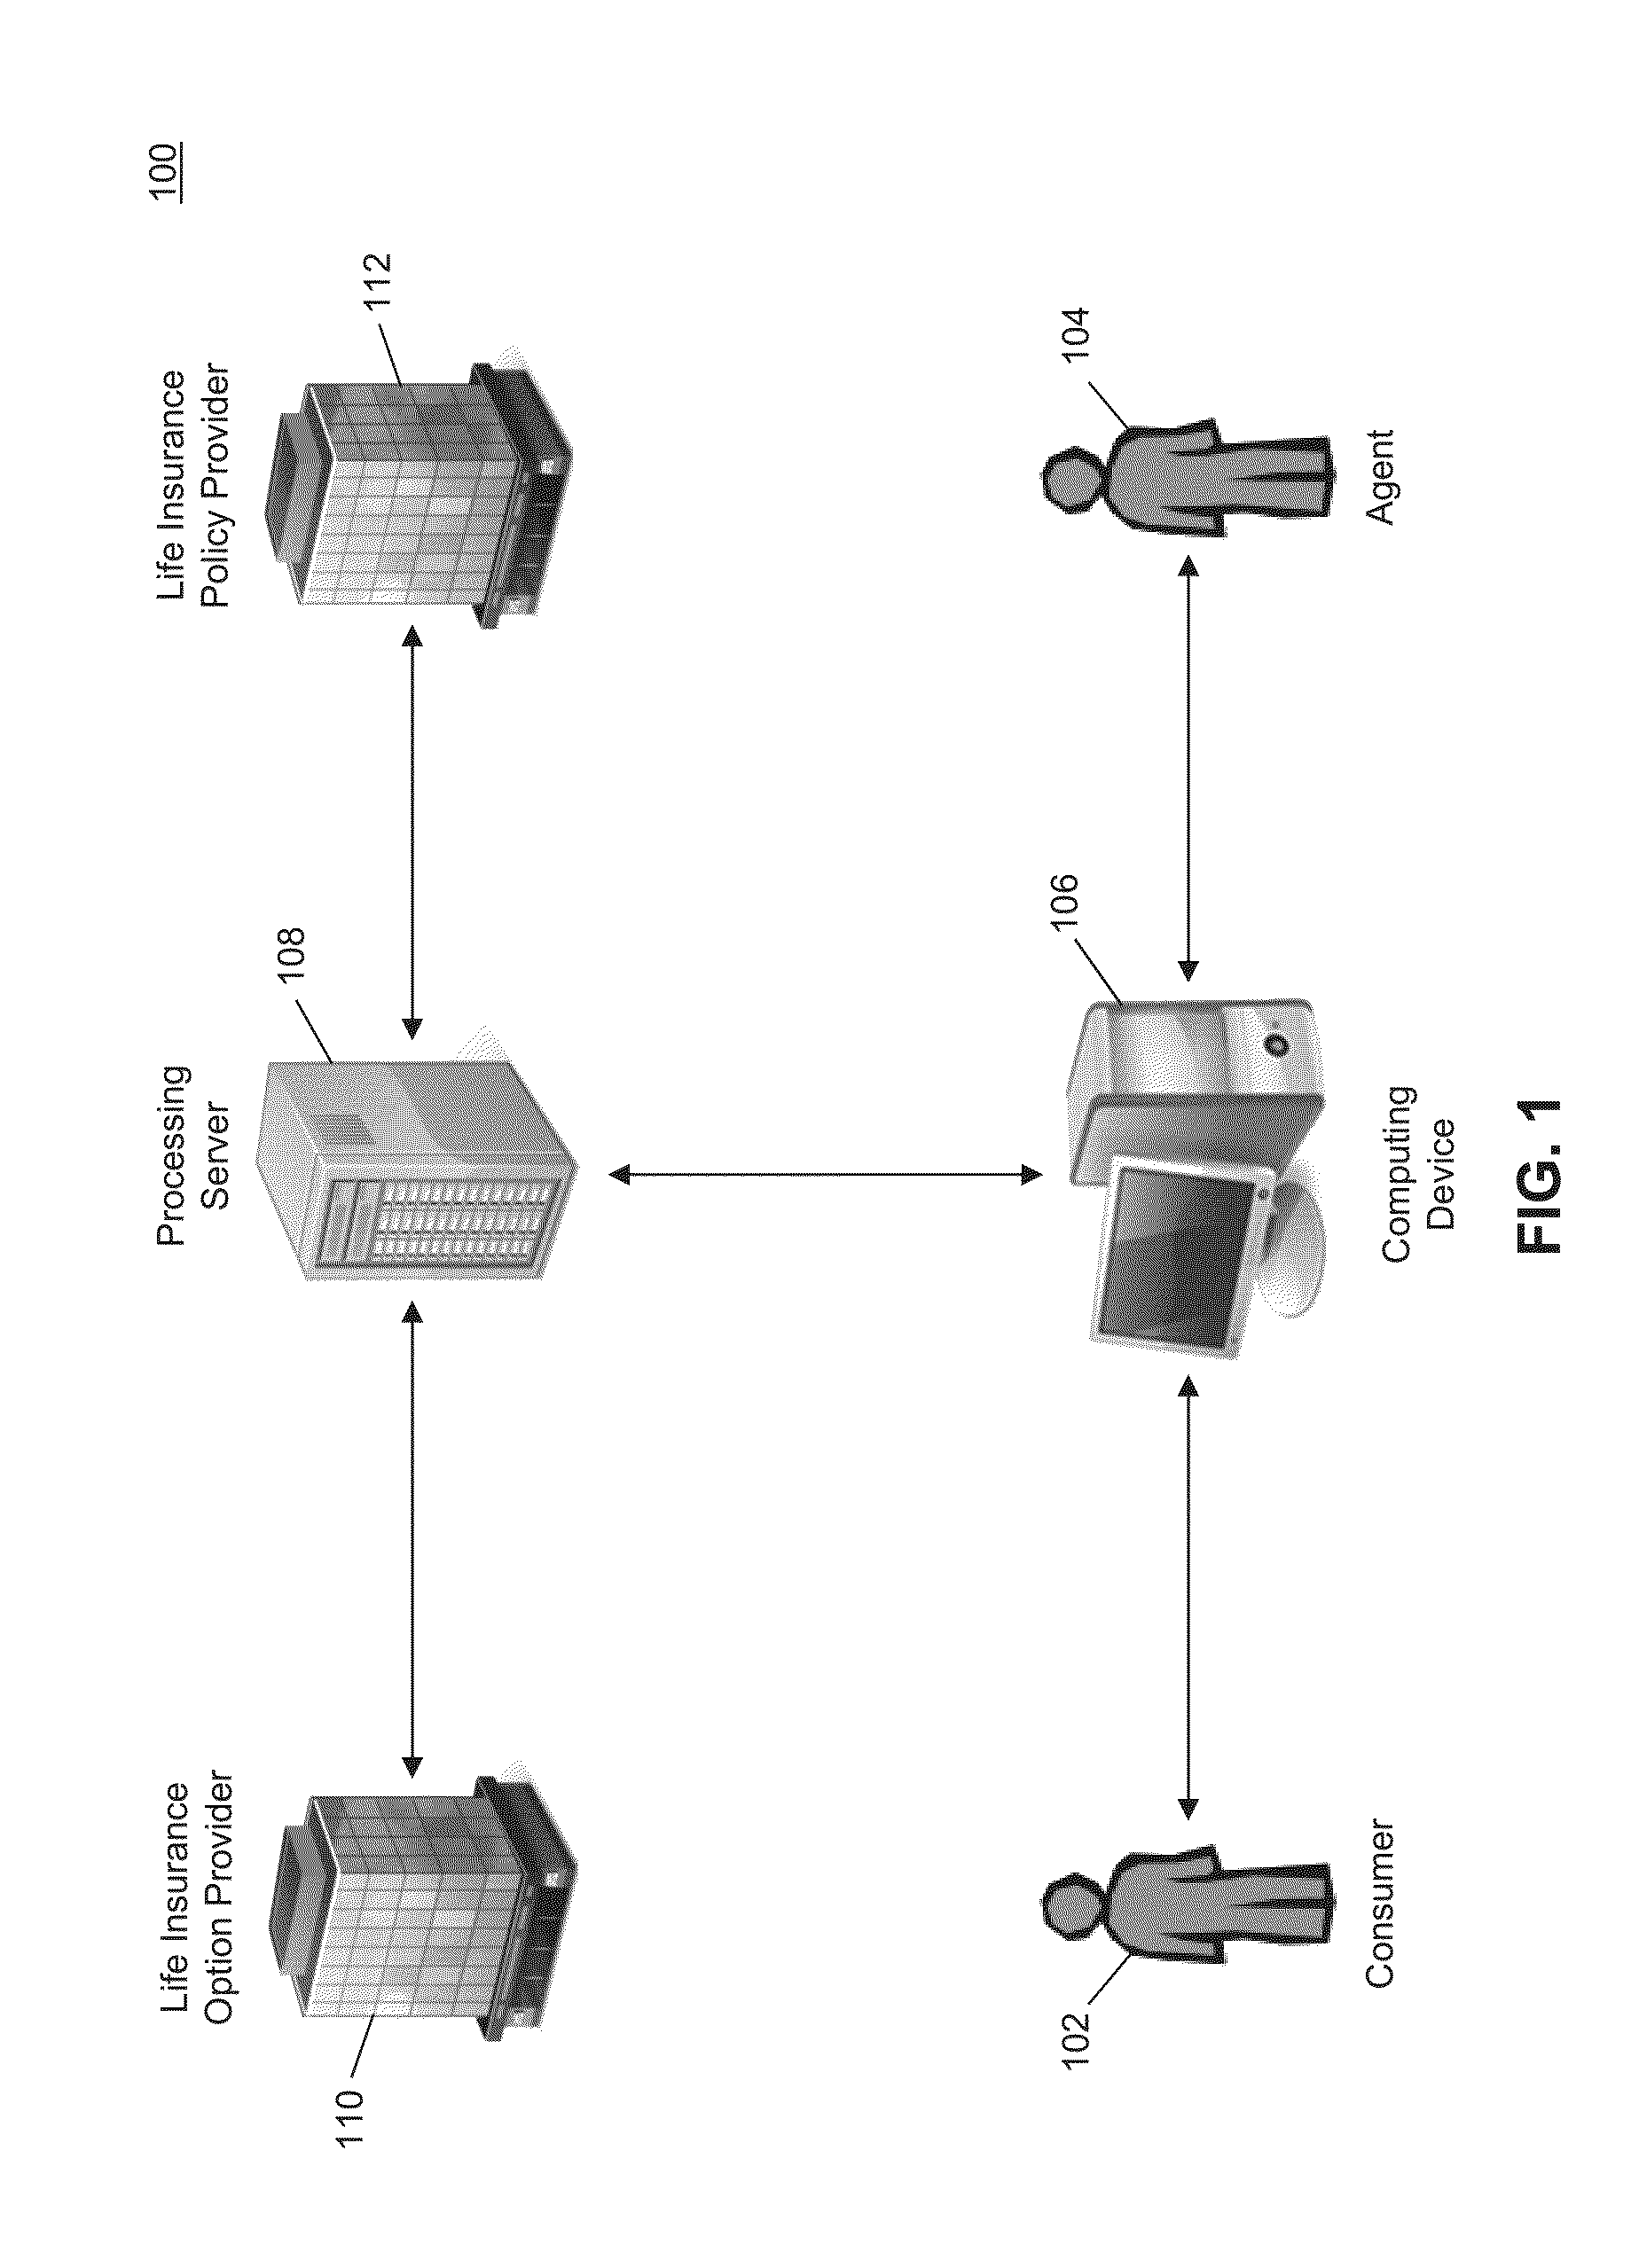 Method and System for Generating and Distributing Optimized Life Insurance Packages and Visual Representations Thereof